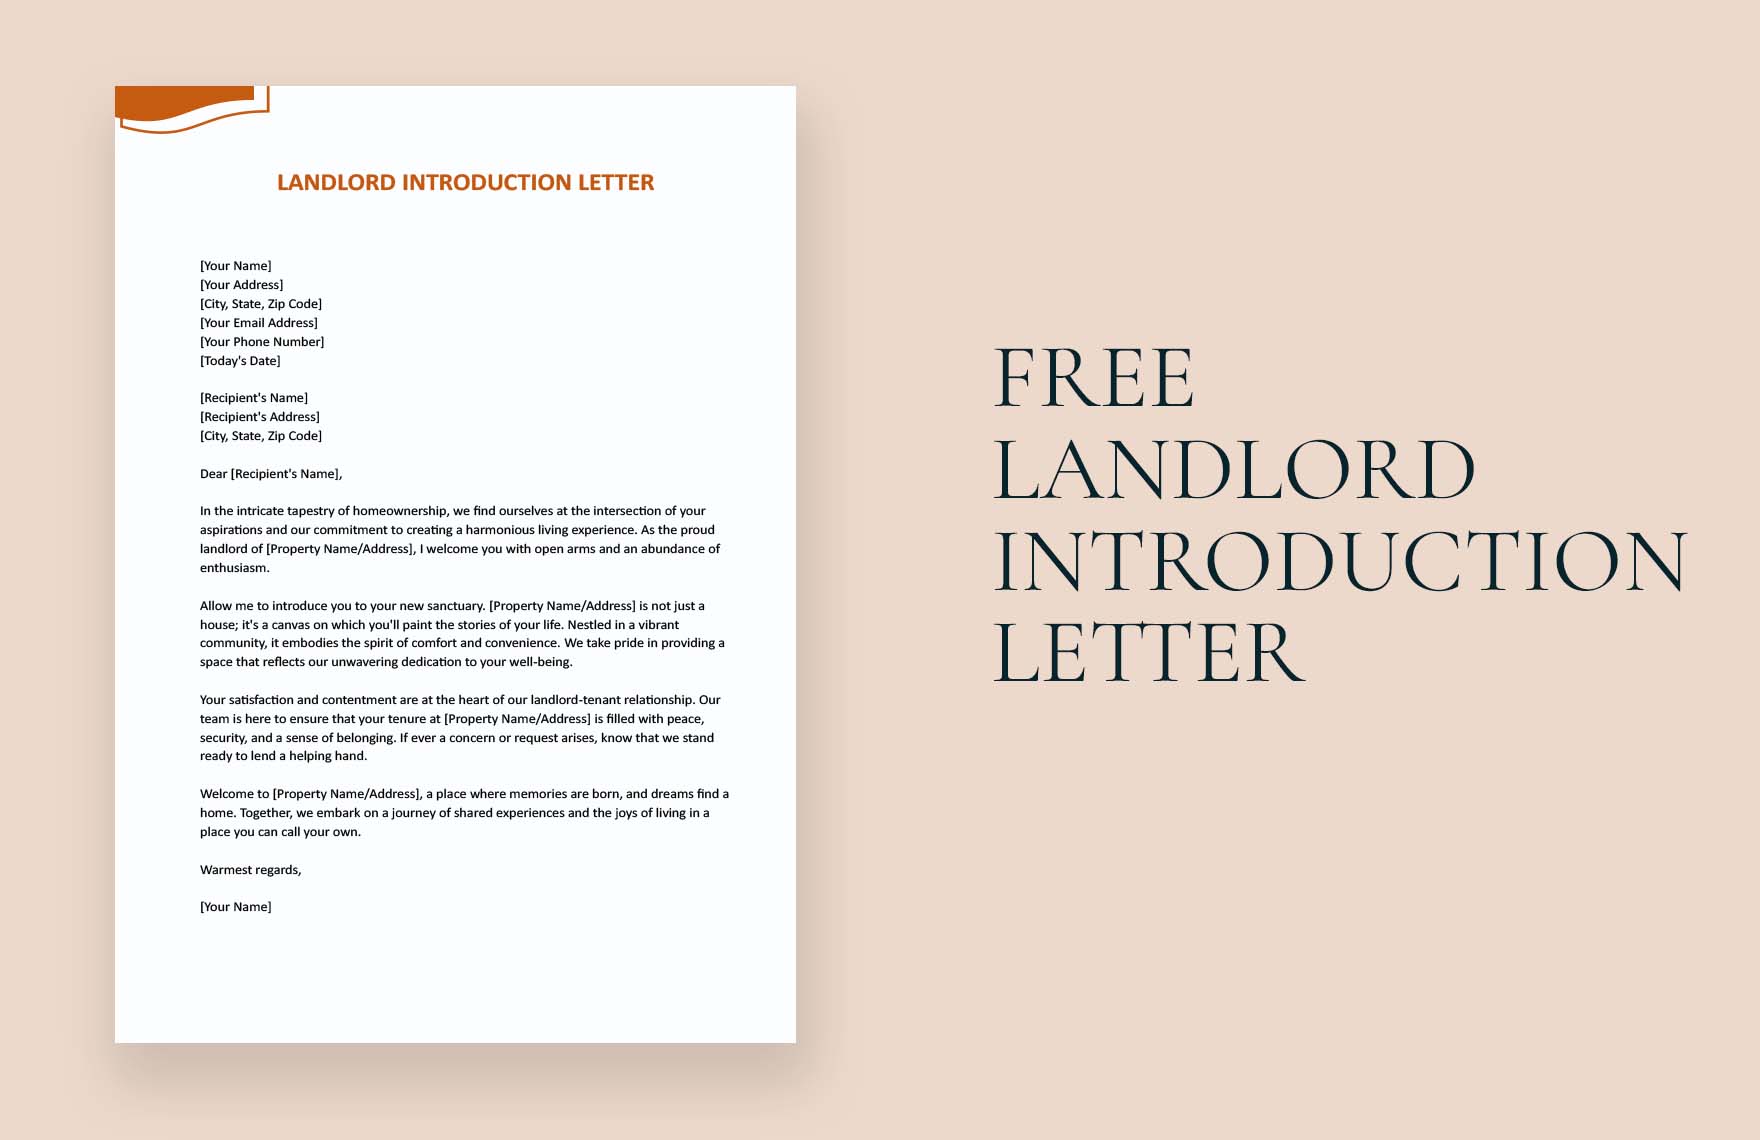 new landlord introduction letter